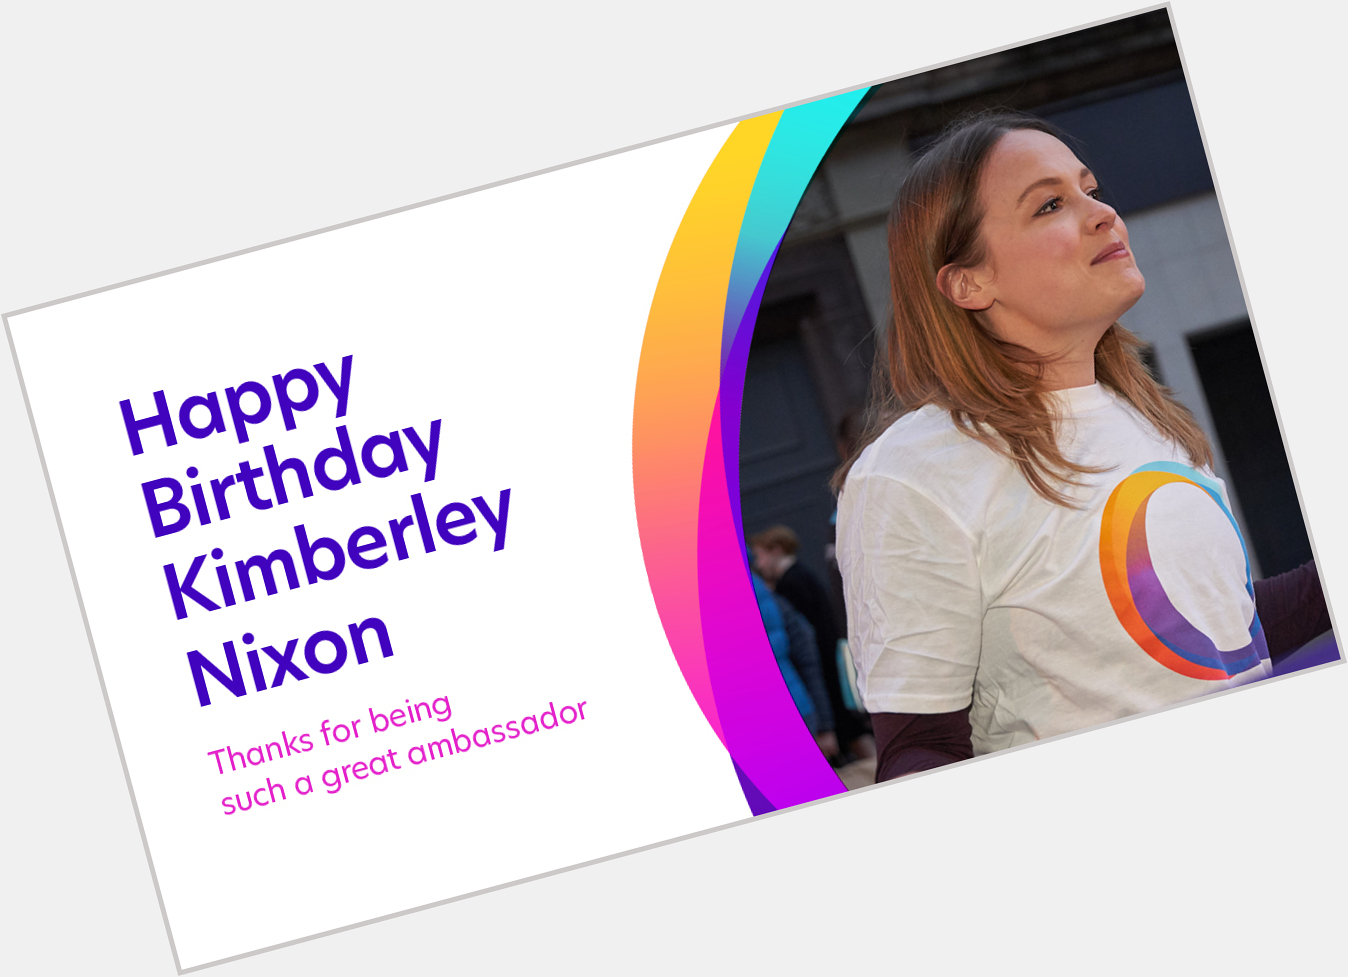 Join us in wishing our ambassador, Kimberley Nixon, a very Happy Birthday! We hope you have a great day  